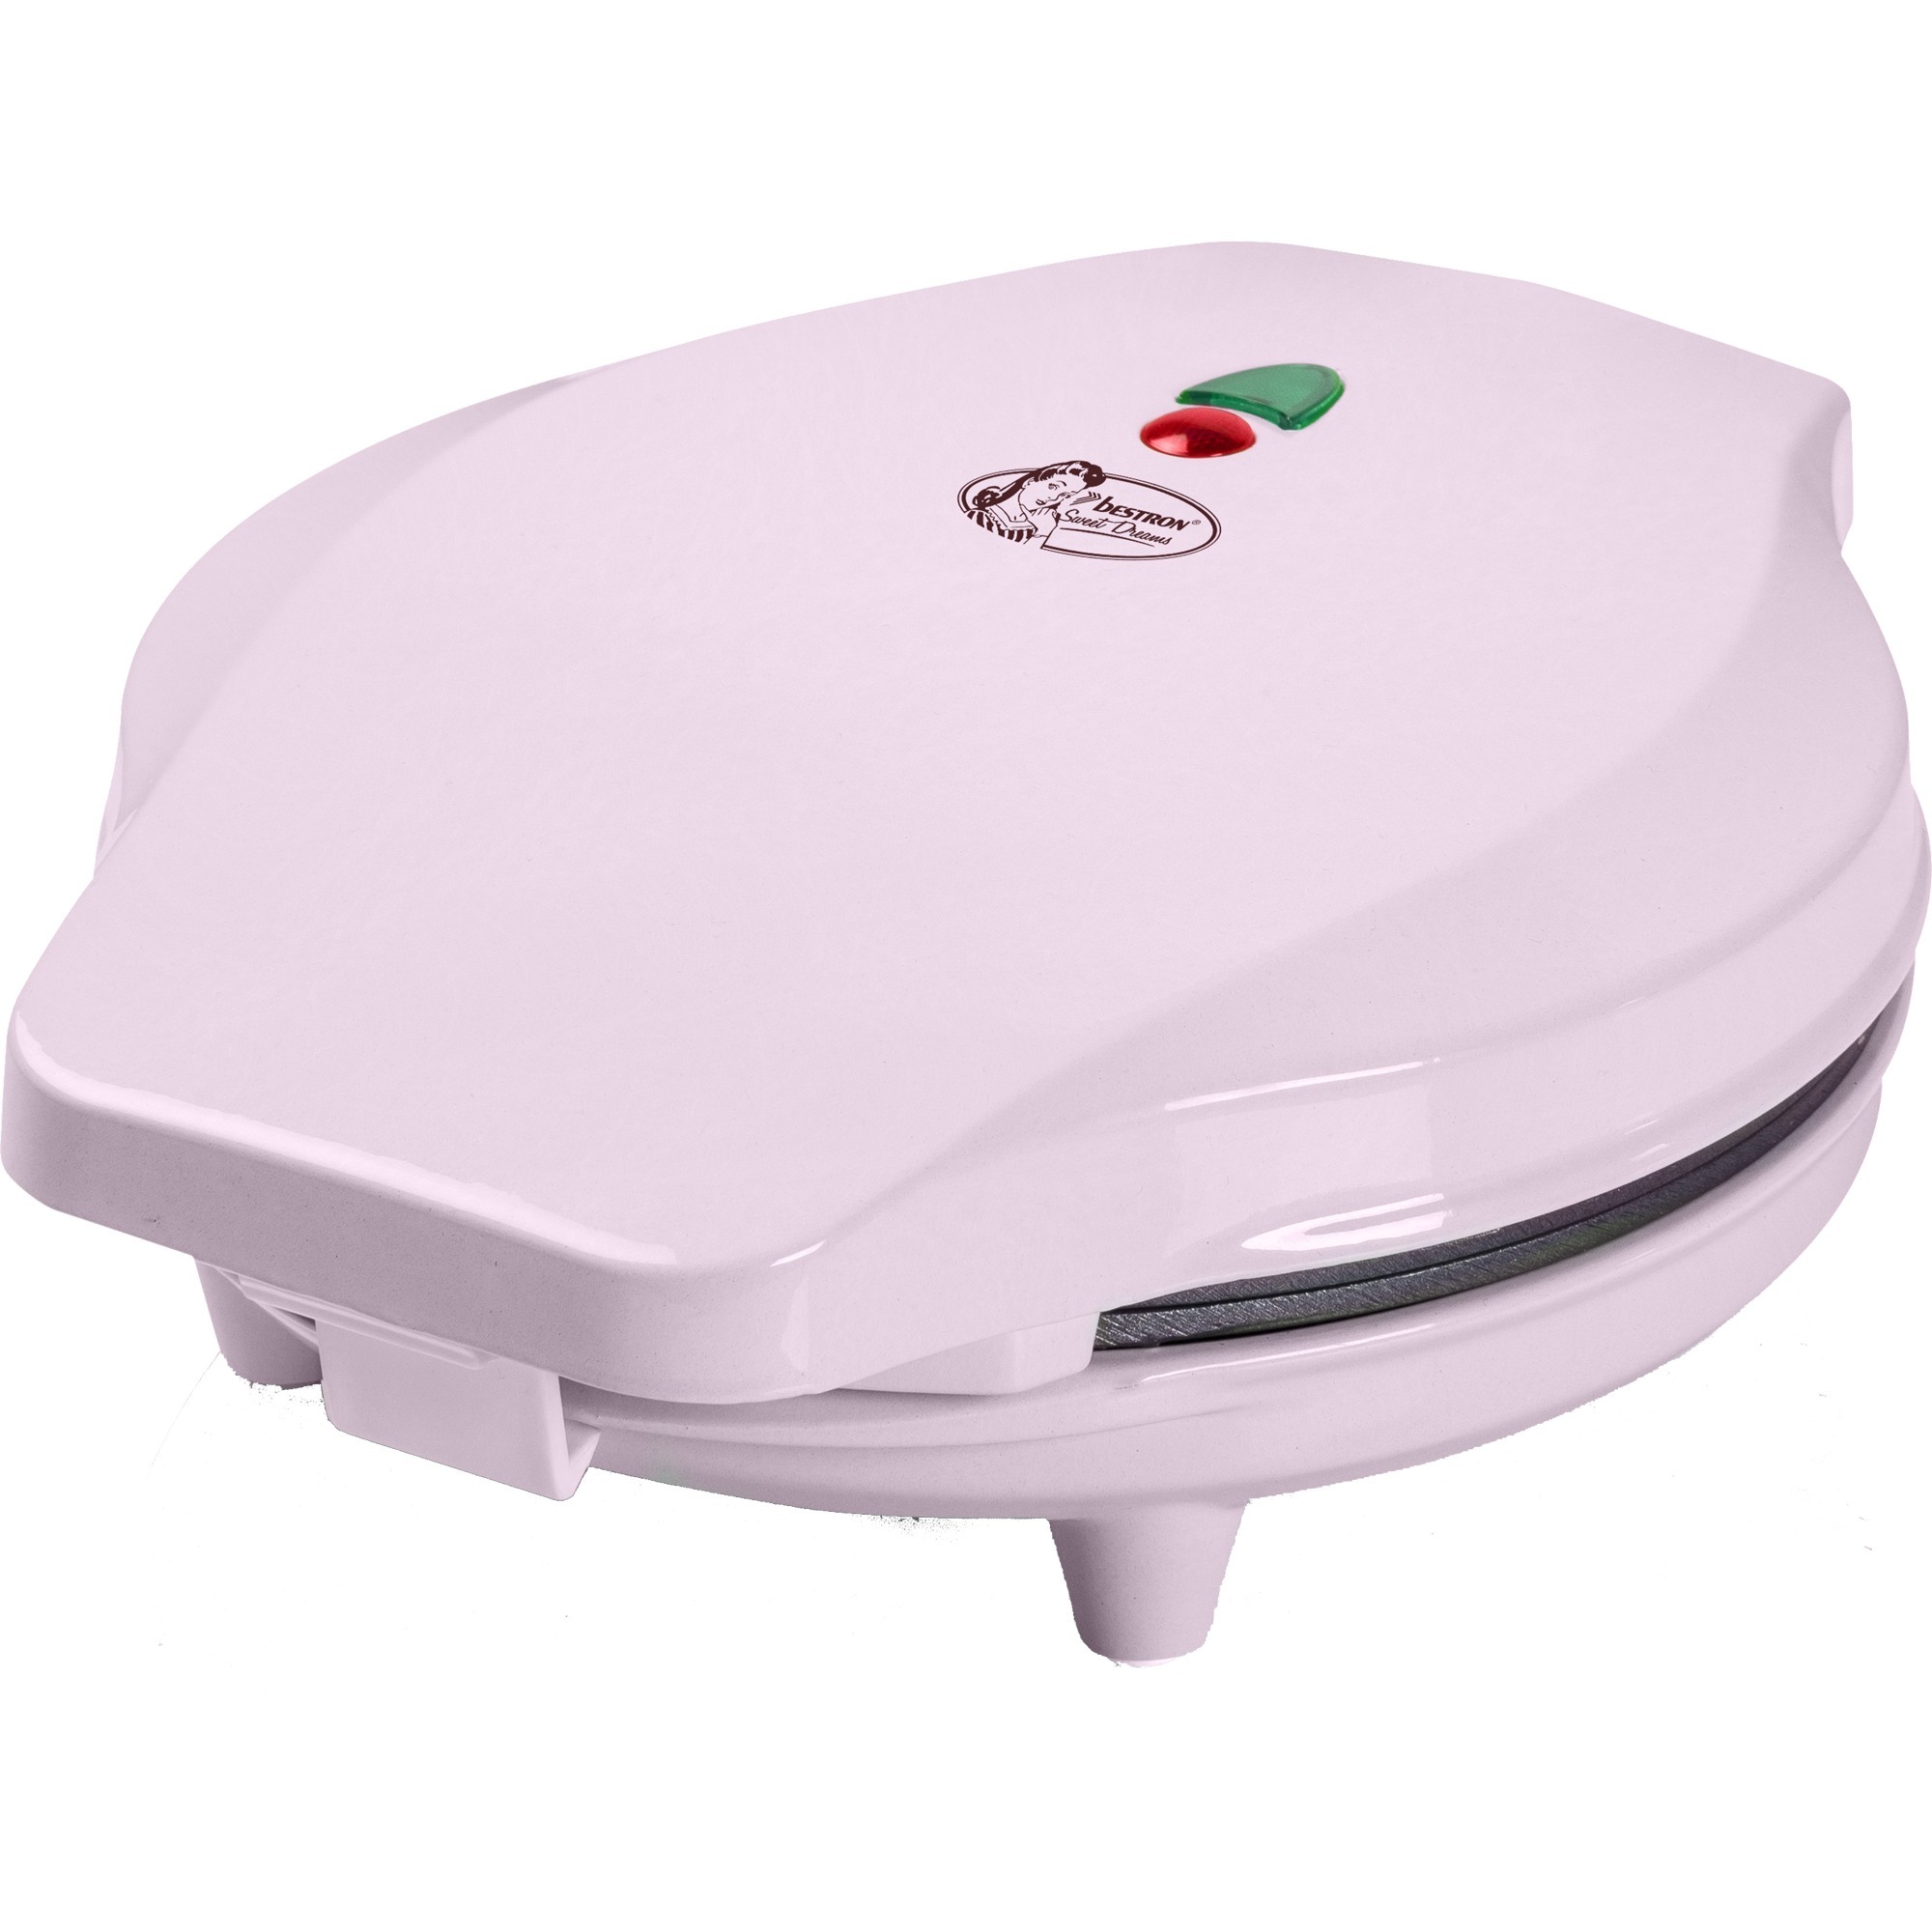 Image of Alternate - Mini-Cookie-Maker Tiere AAW700P, Cookie Maker online einkaufen bei Alternate